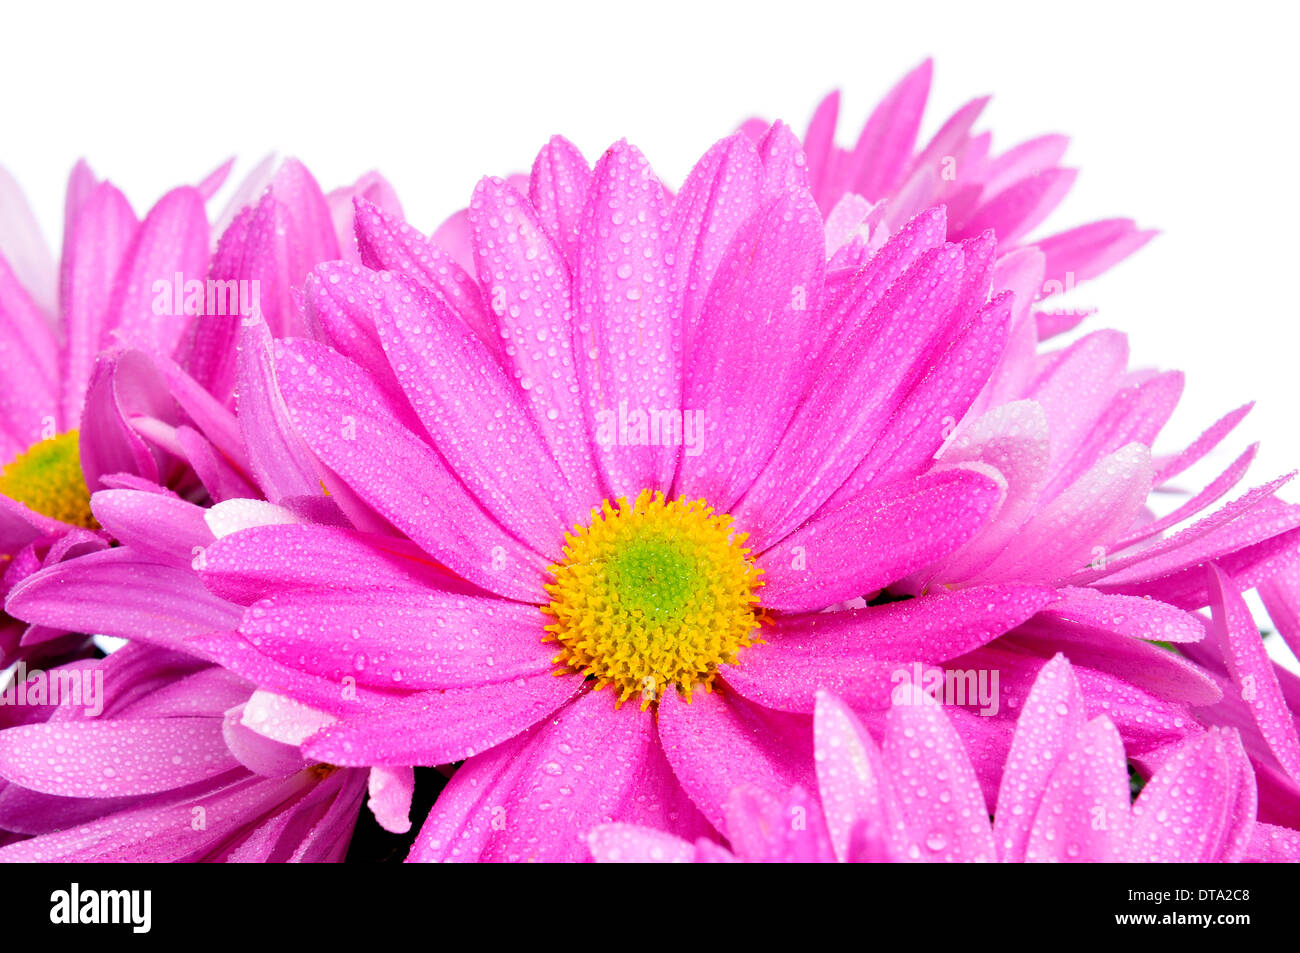 closeup of some pink gerbera daisies on a white background Stock Photo